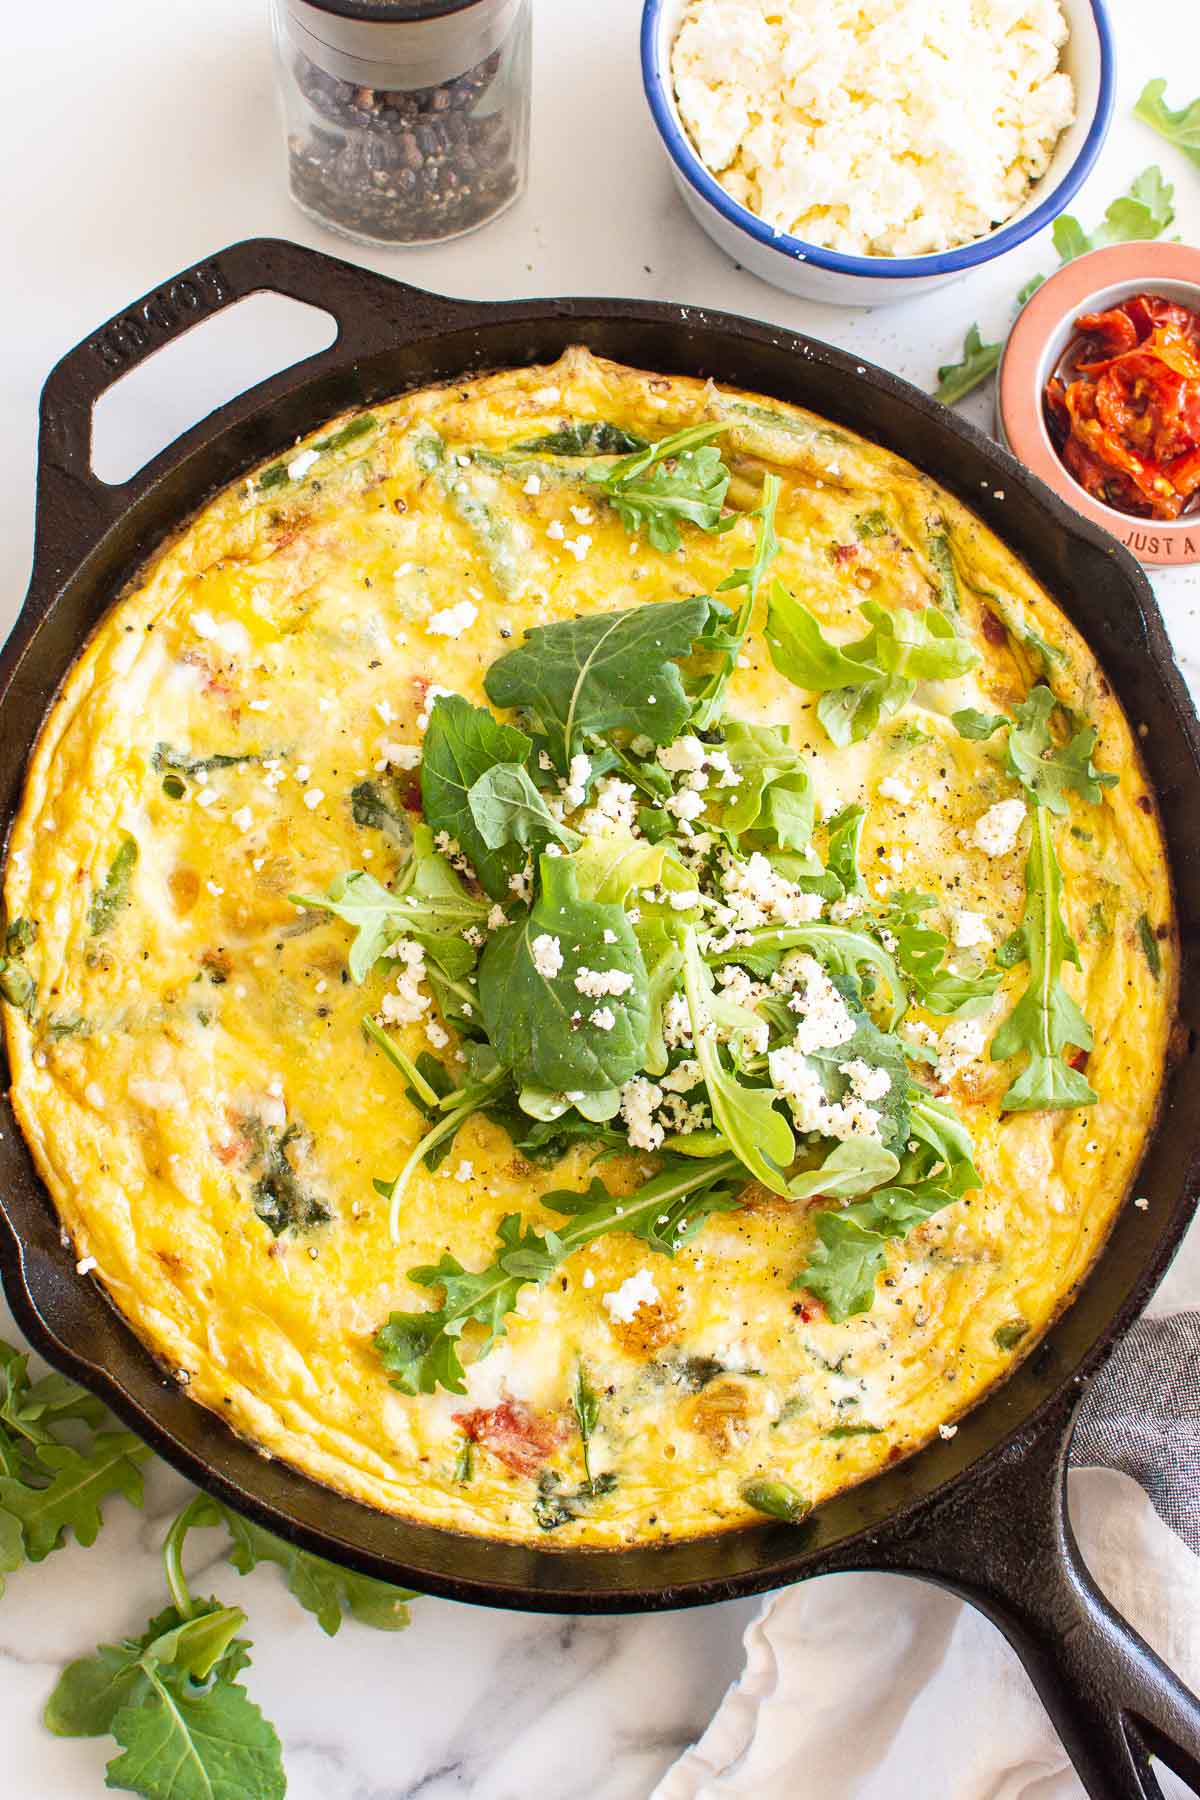 Vegetable frittata in a skillet garnished with feta cheese and greens.